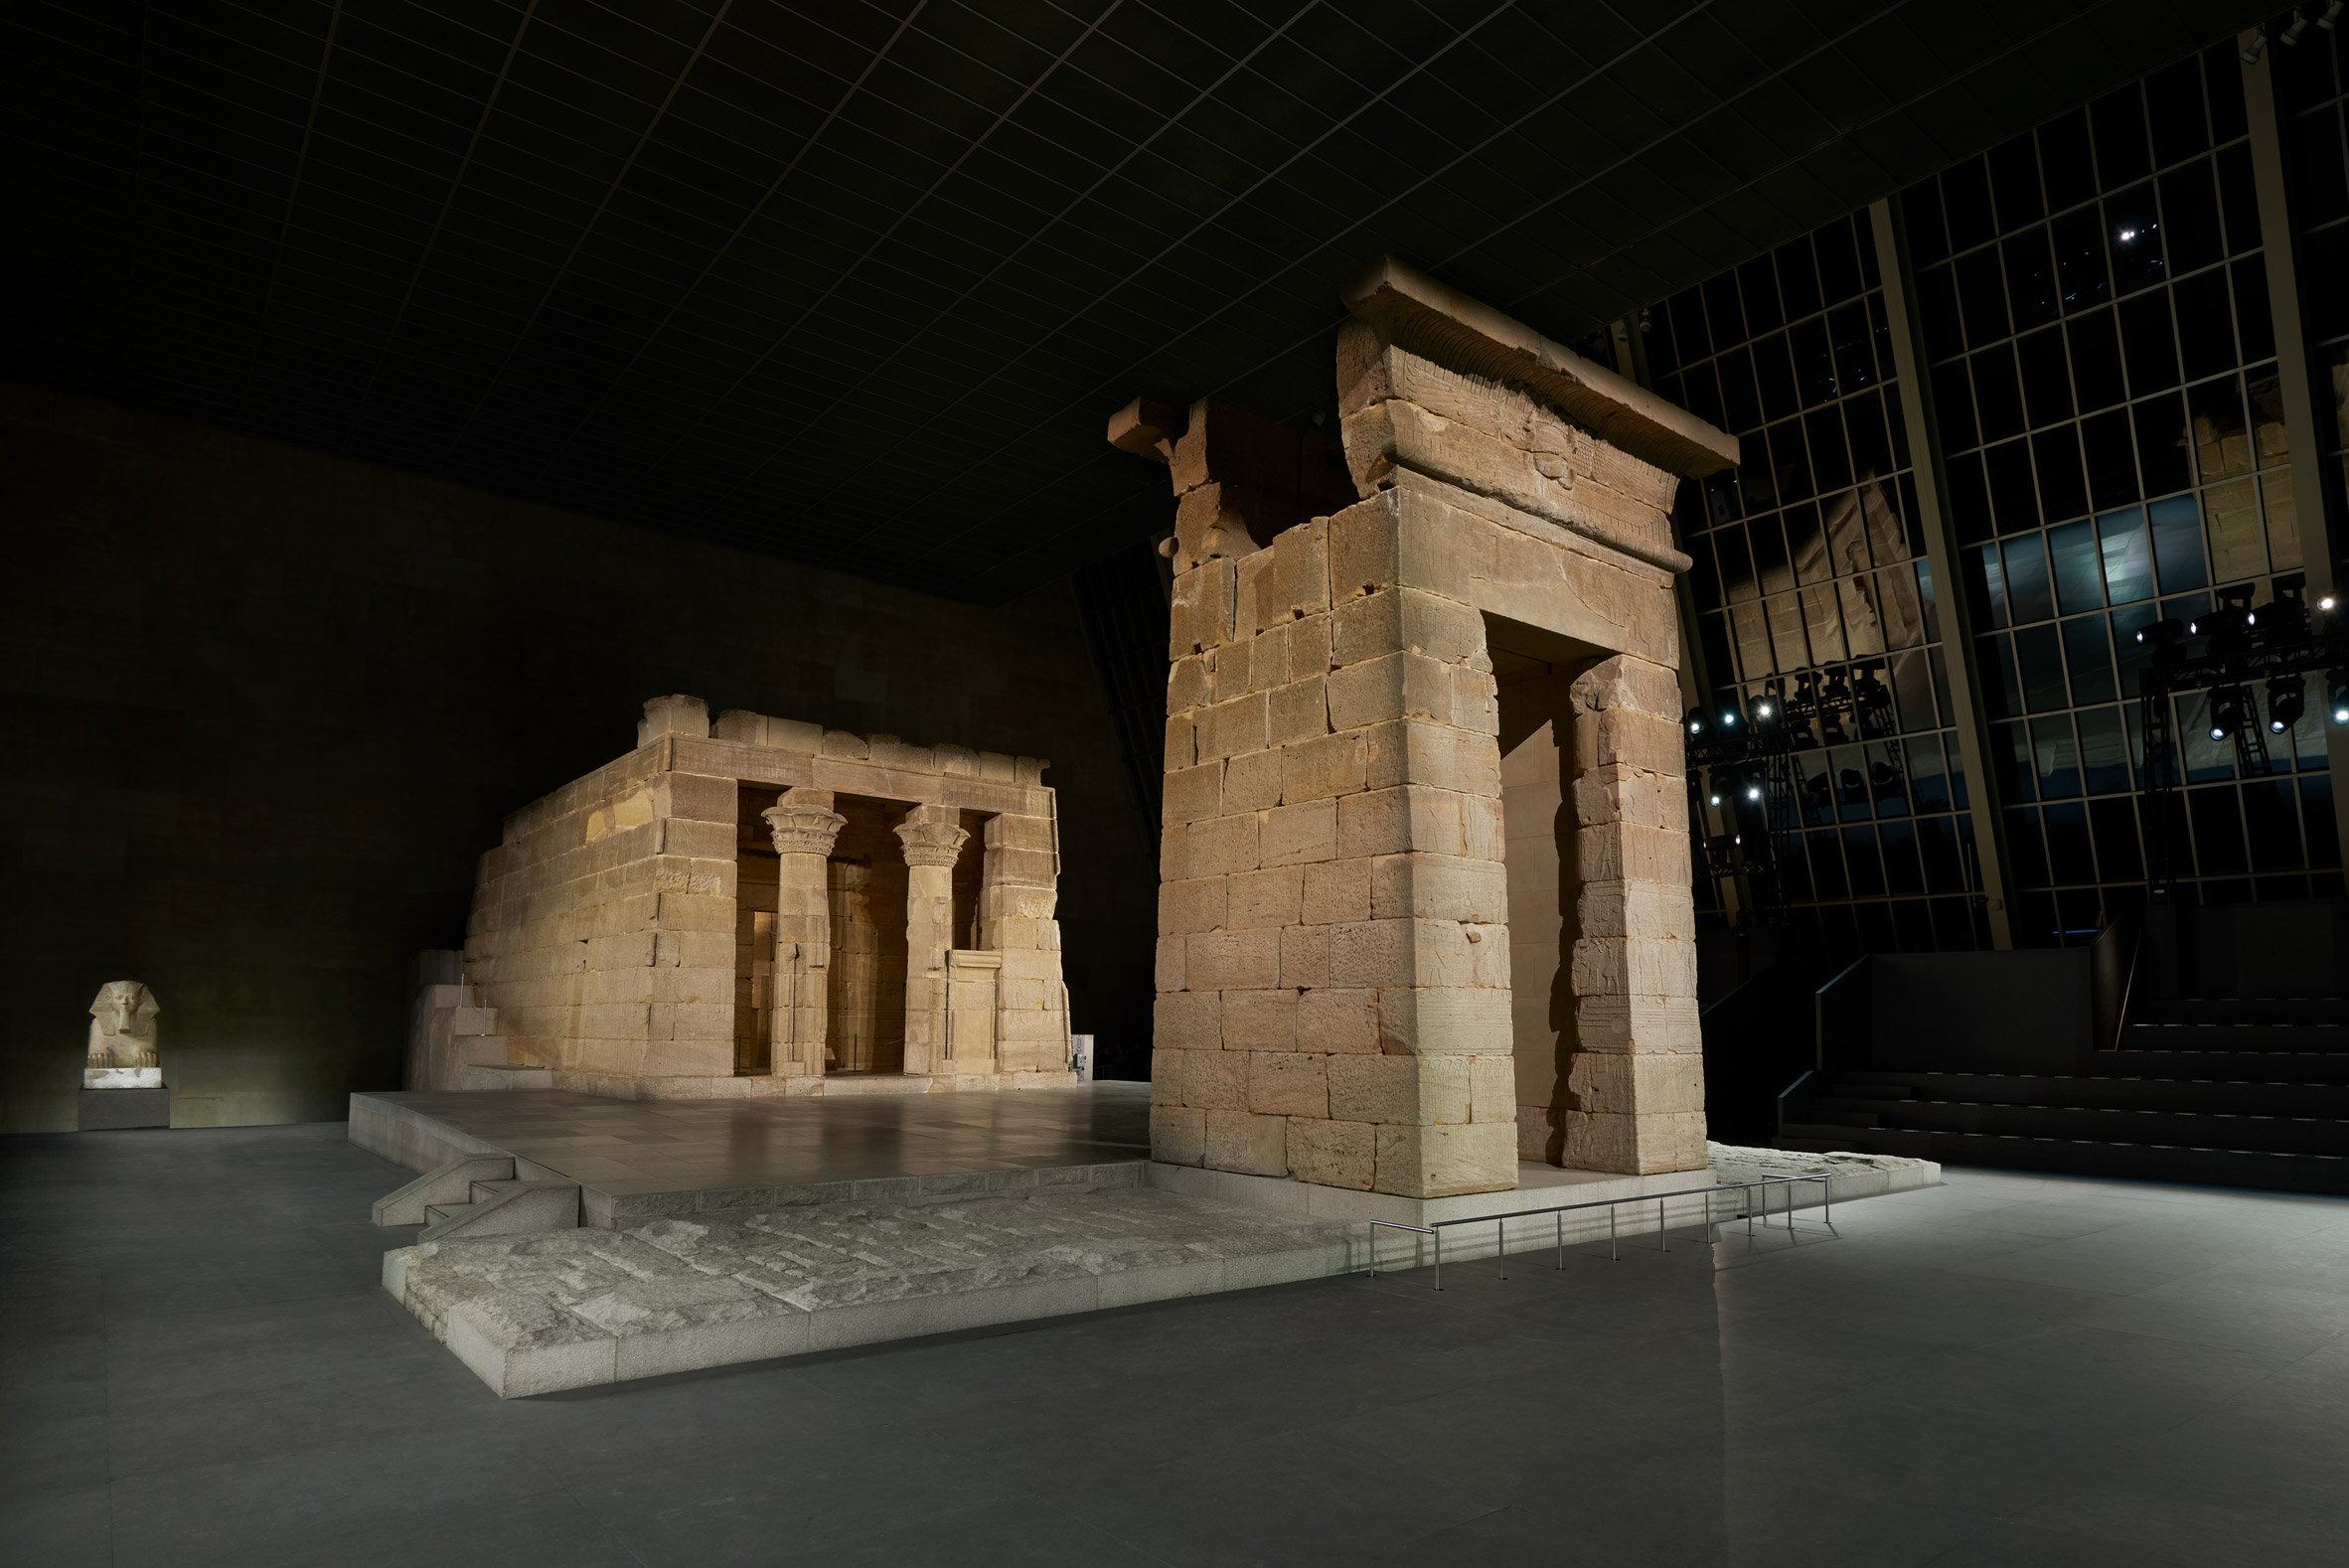 Chanel presents Egyptian-themed collection around The Met's Temple of Dendur